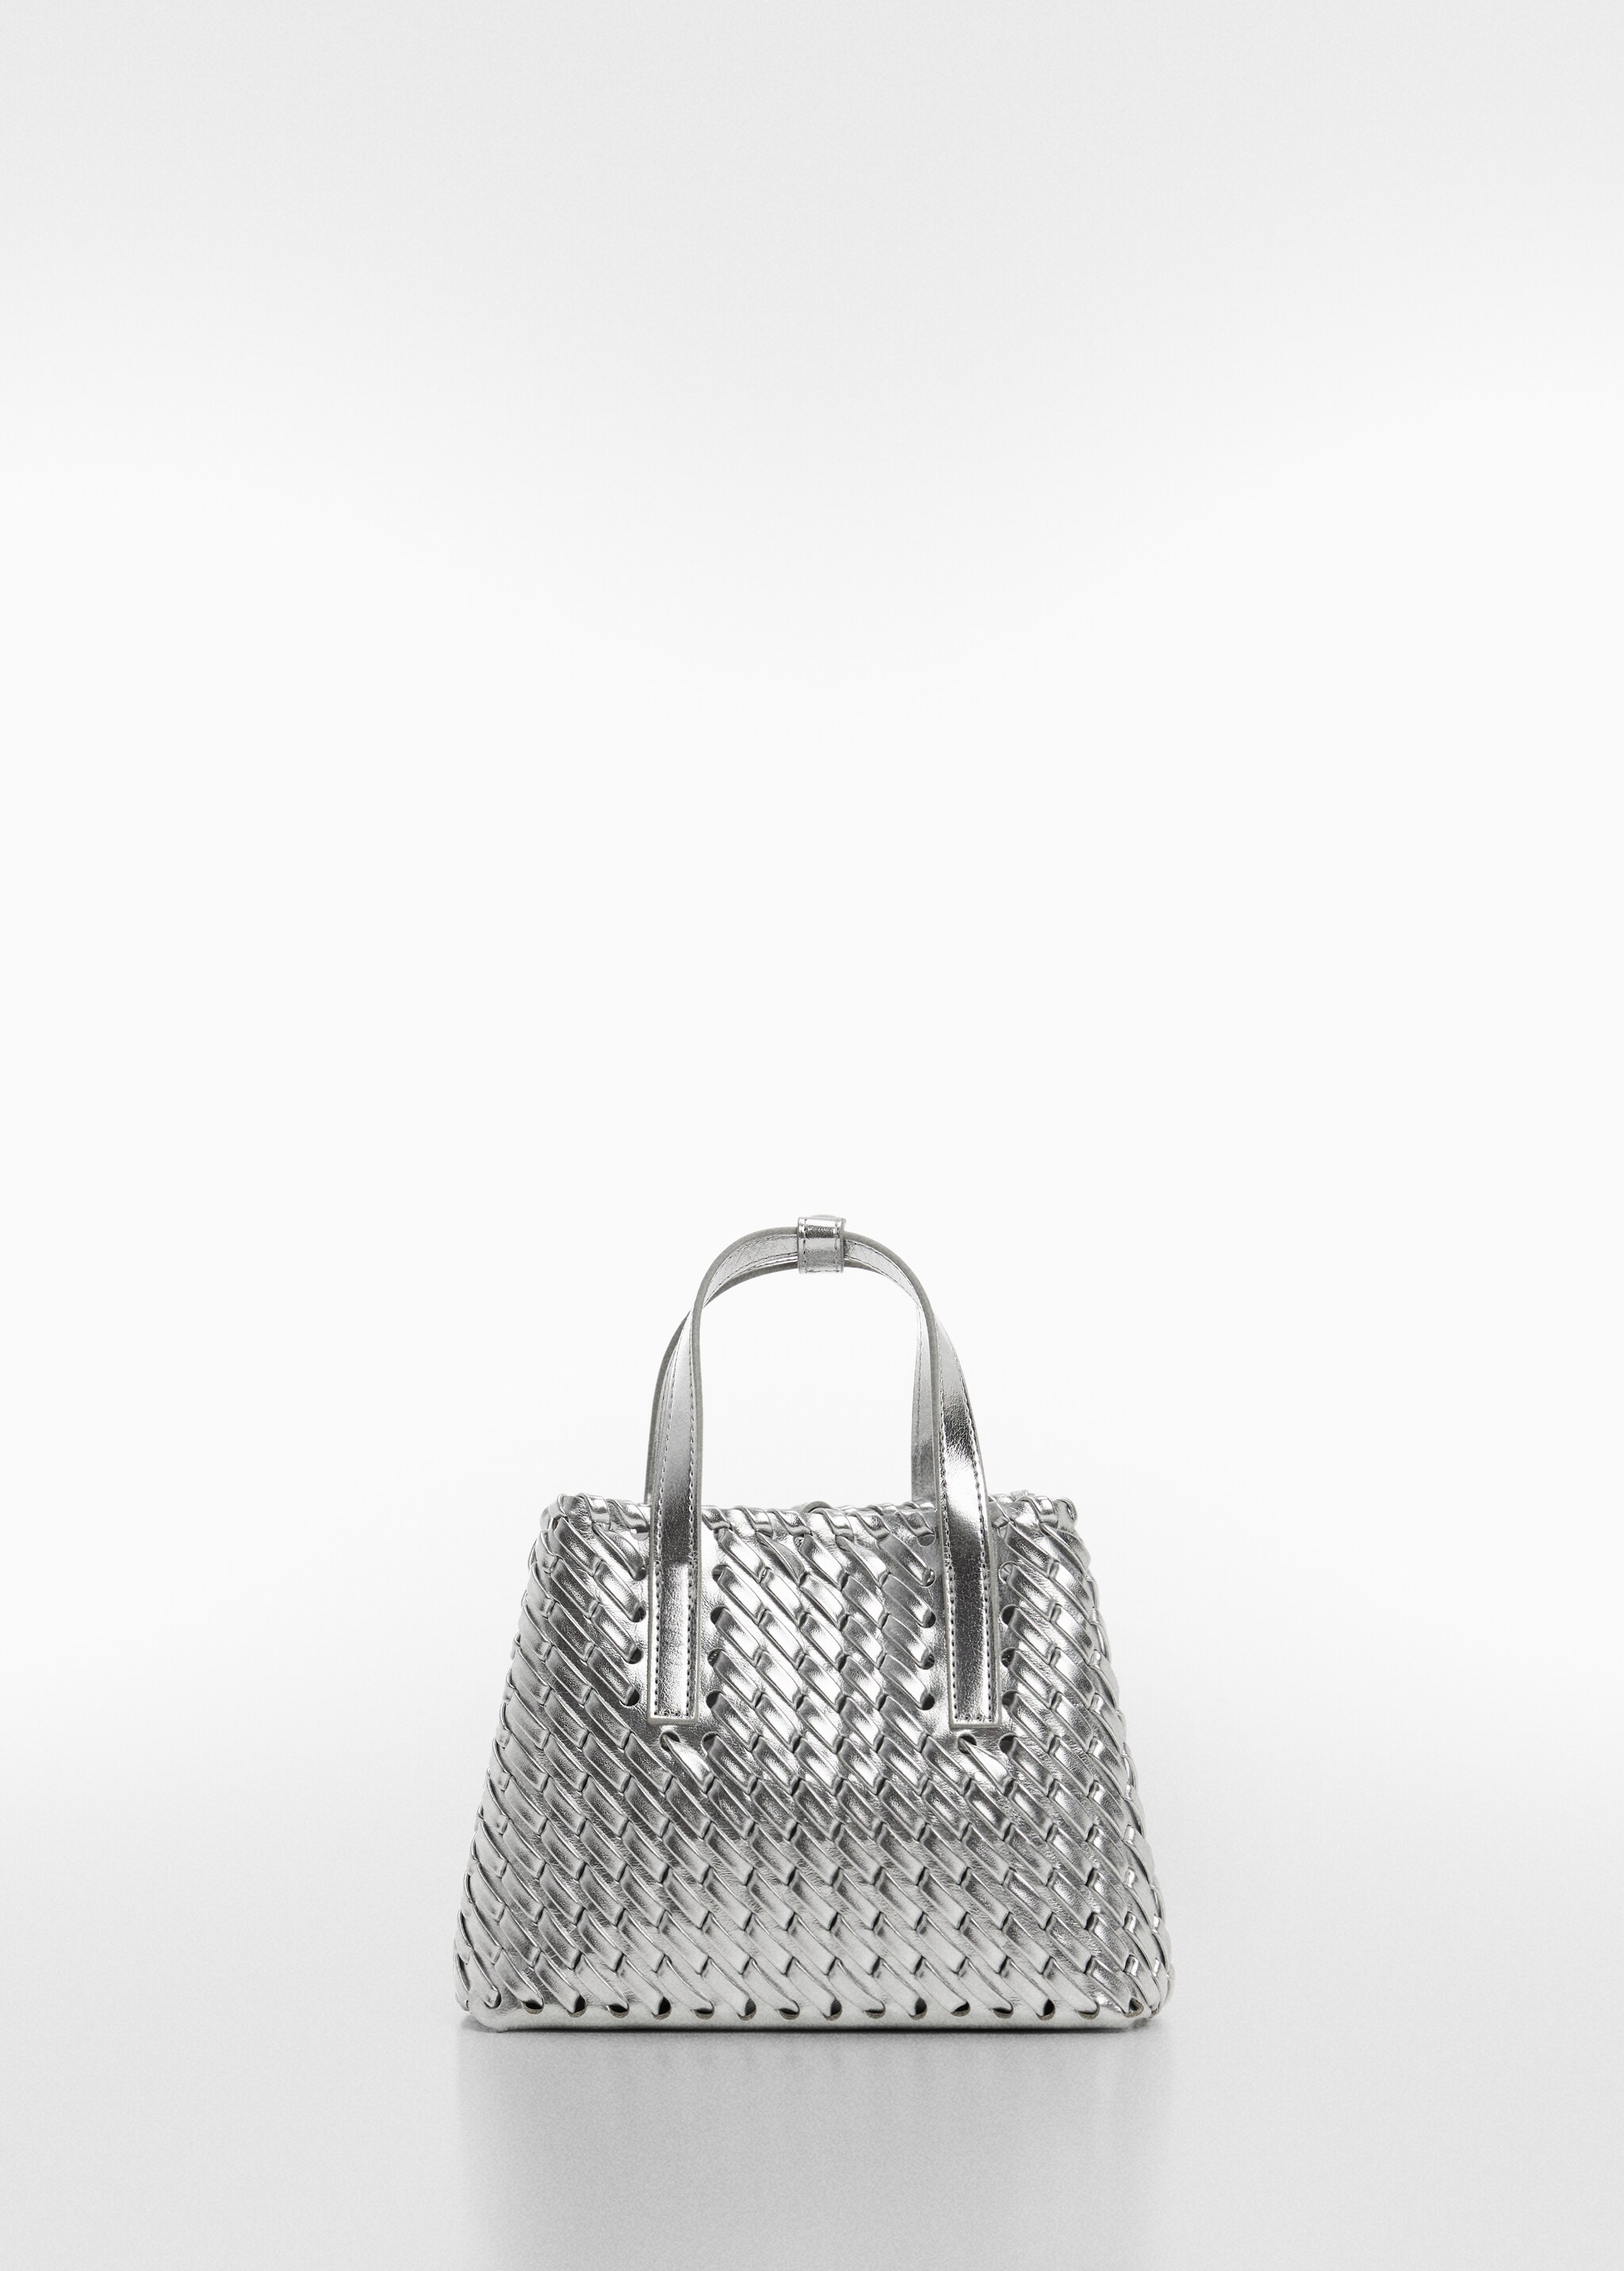 Double handle braided bag - Article without model